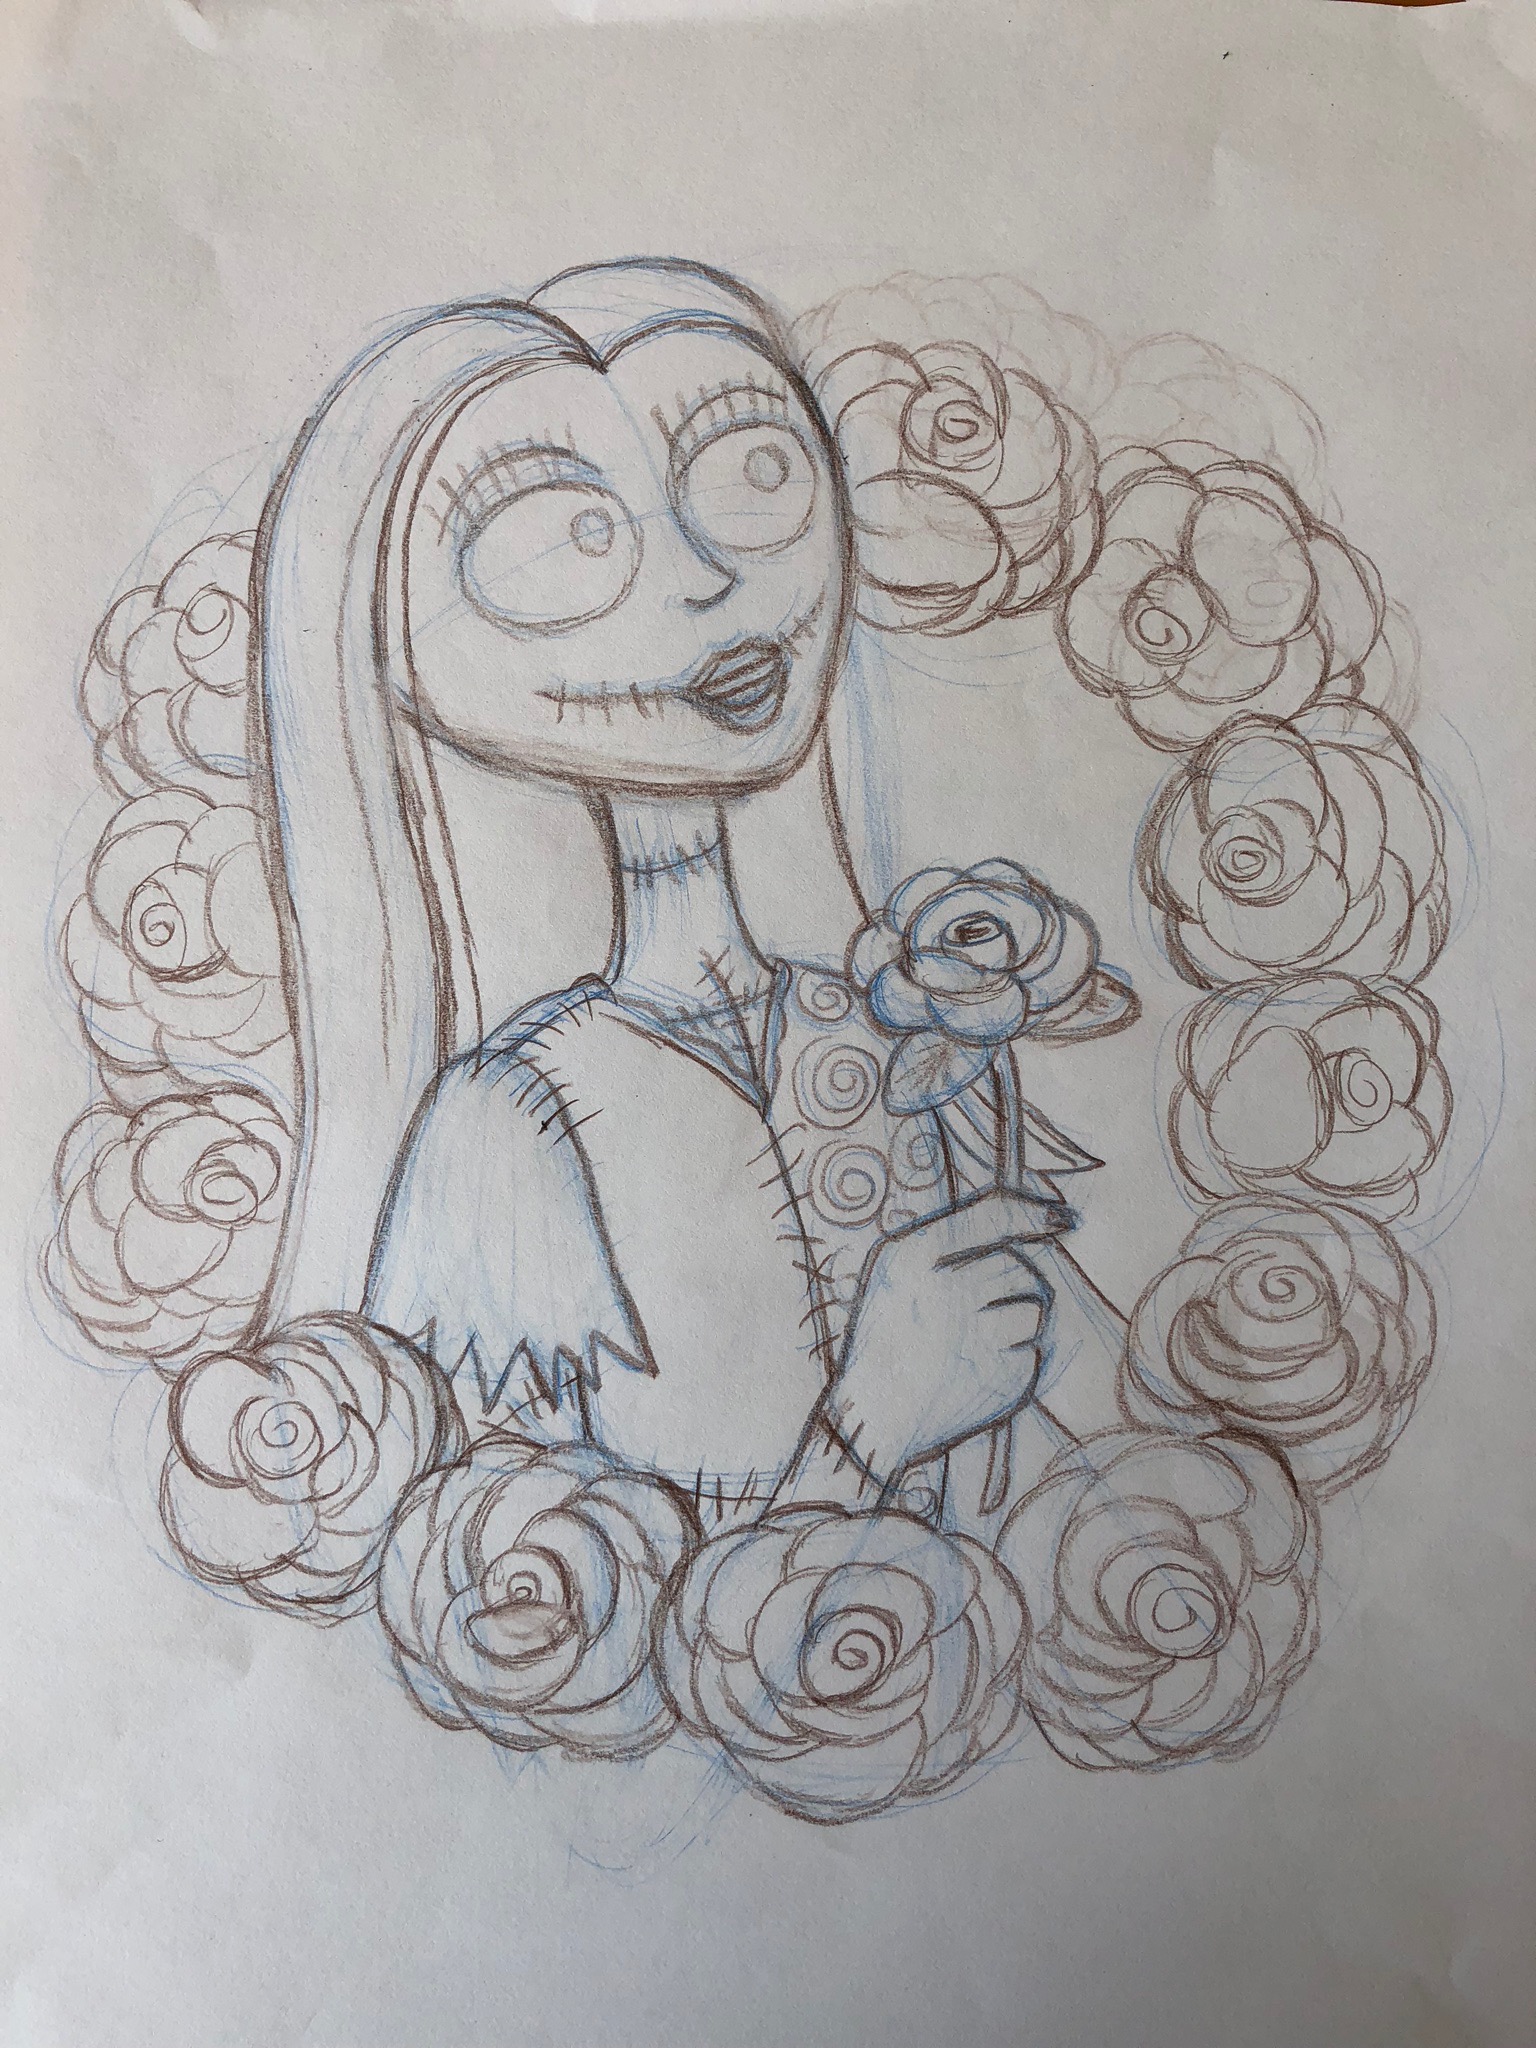 Sketch of Sally from The Nightmare Before Christmas wreathed with roses